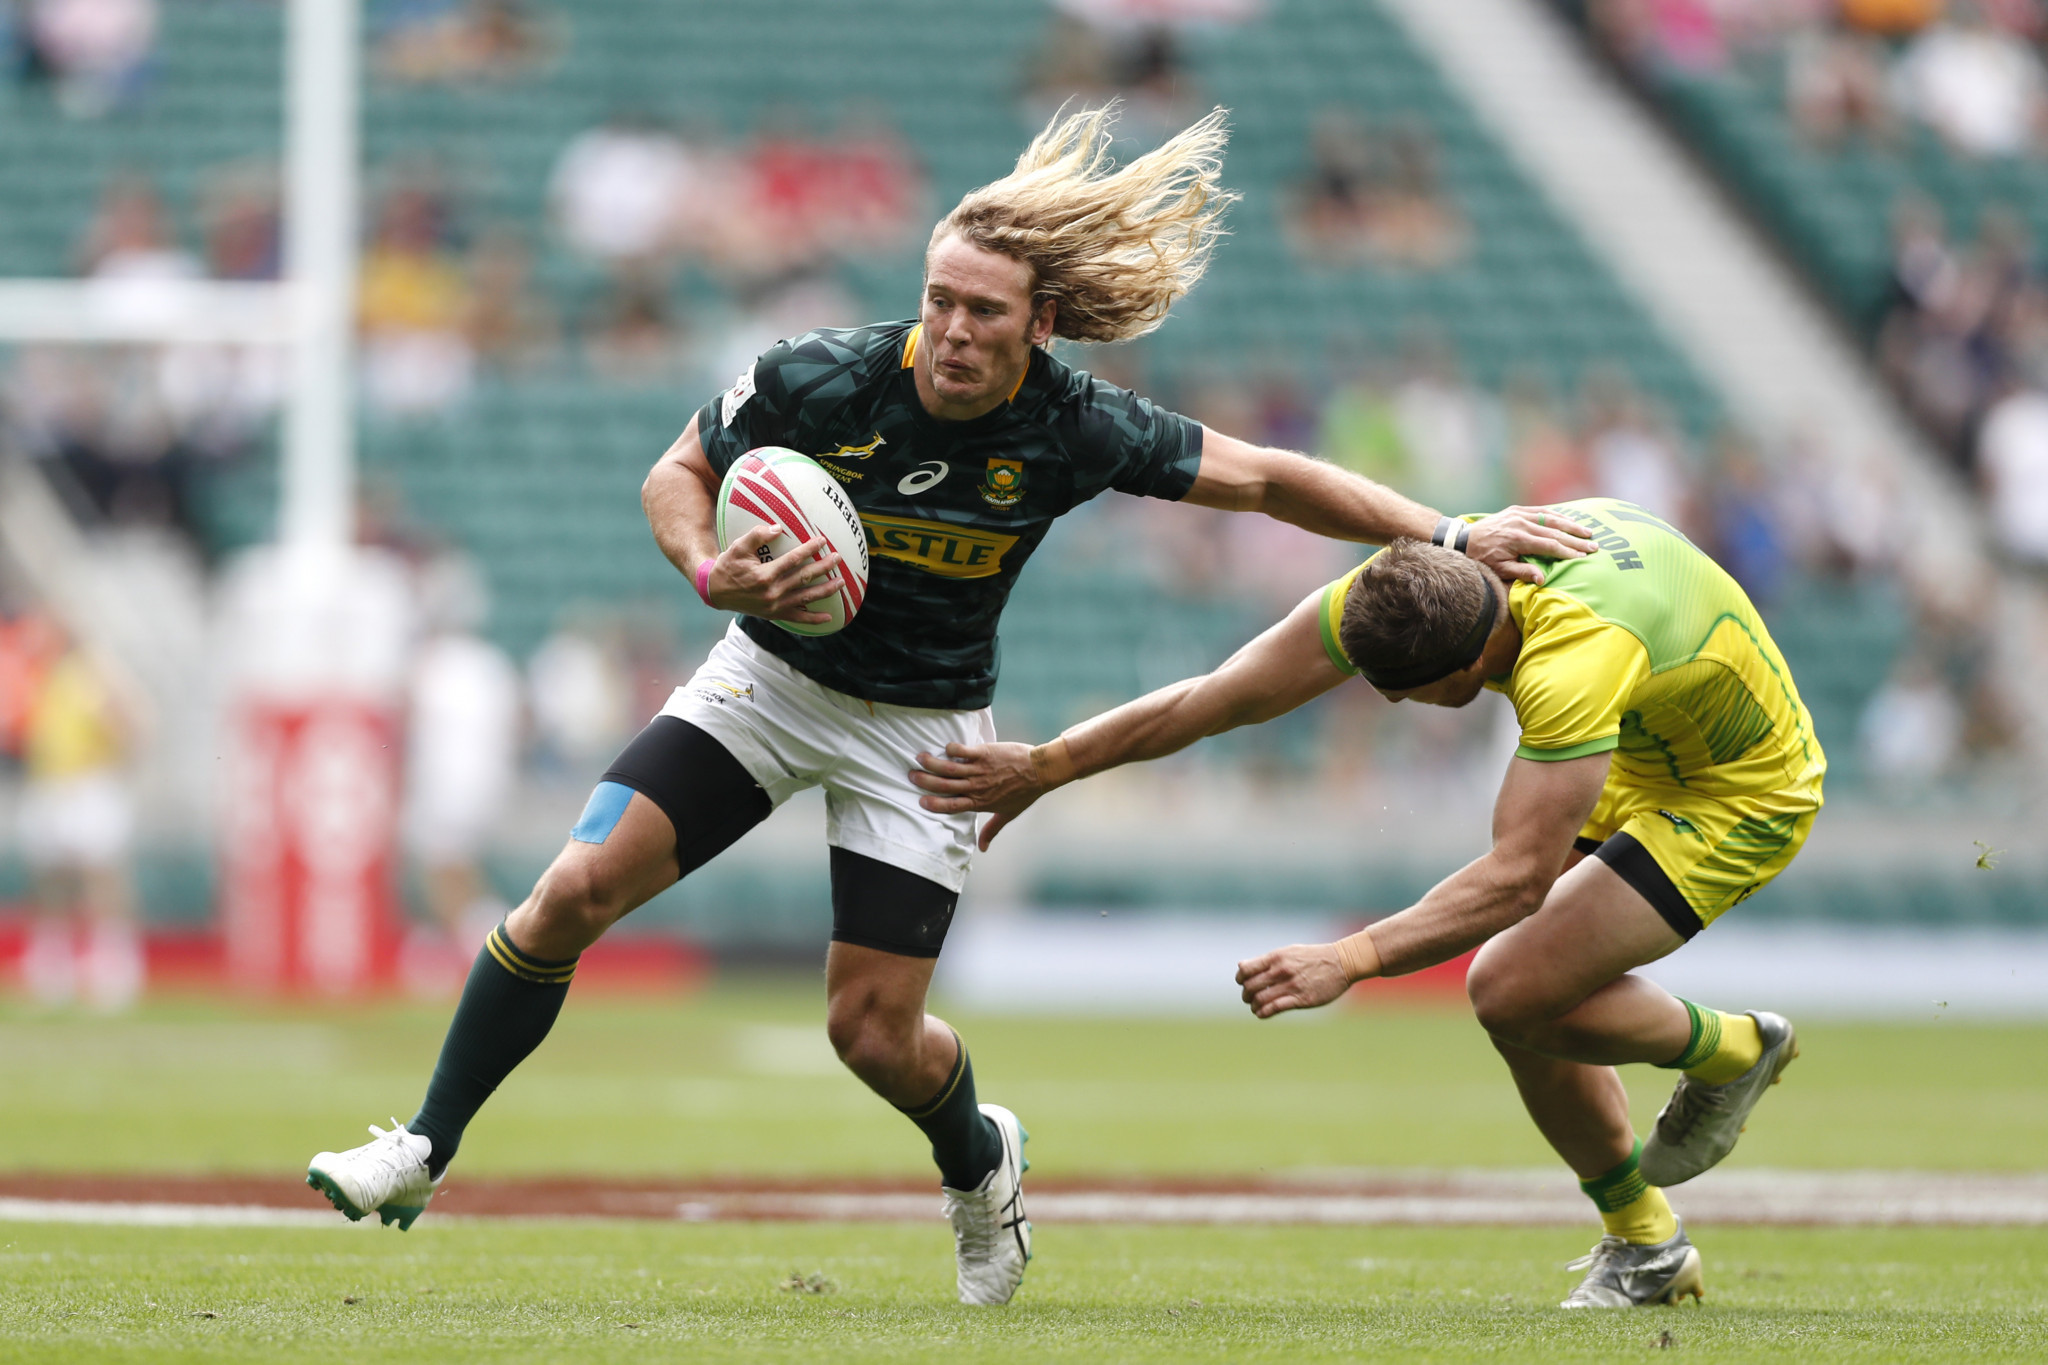 South Africa will qualify for the Tokyo 2020 Olympic Games just for taking to the pitch at Stade Jean Bouin in Paris ©Getty Images